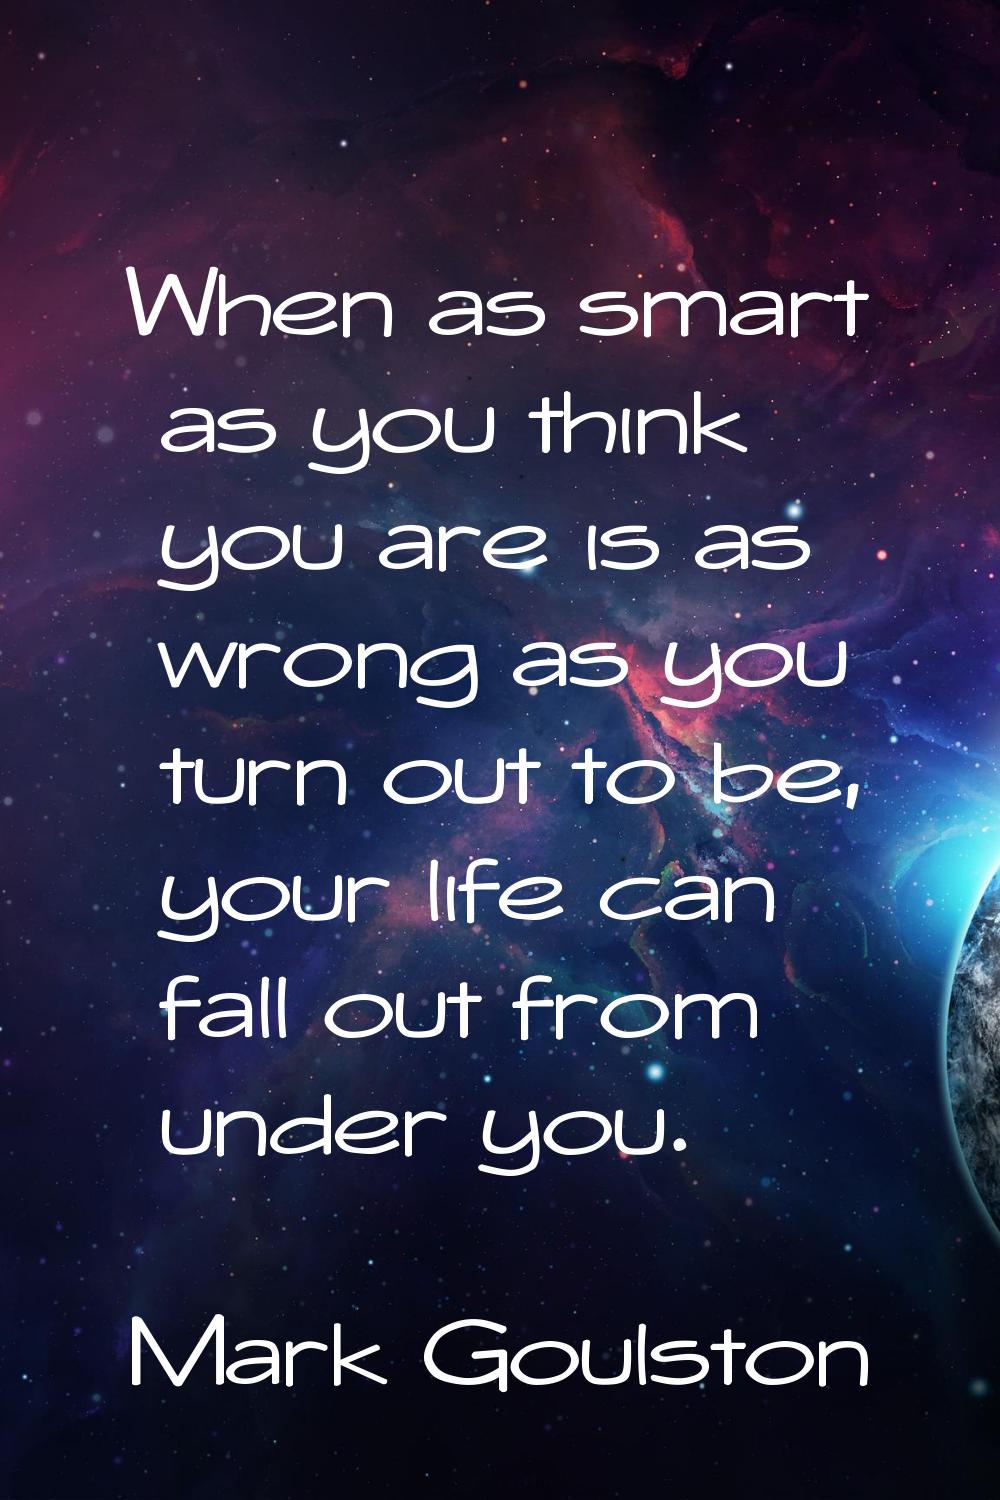 When as smart as you think you are is as wrong as you turn out to be, your life can fall out from u